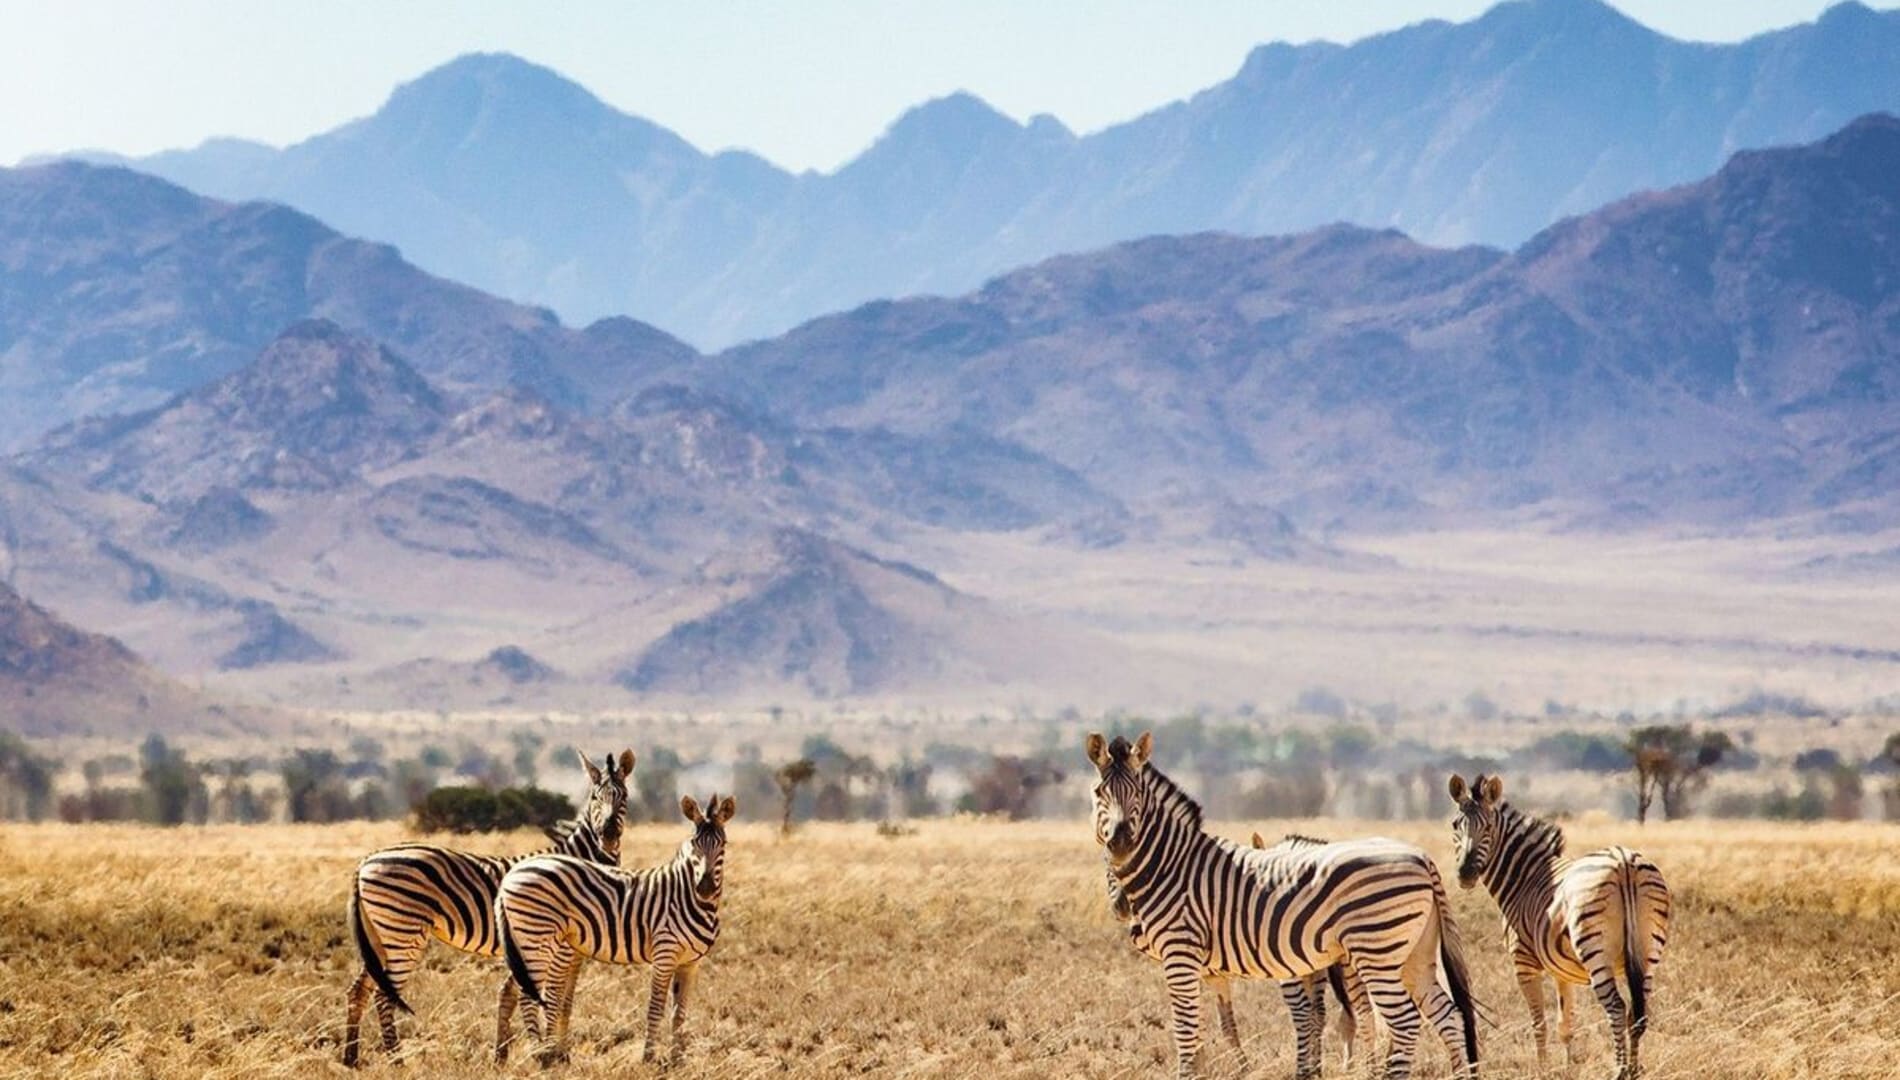 Namibia Safari from USA: Everything you need to know